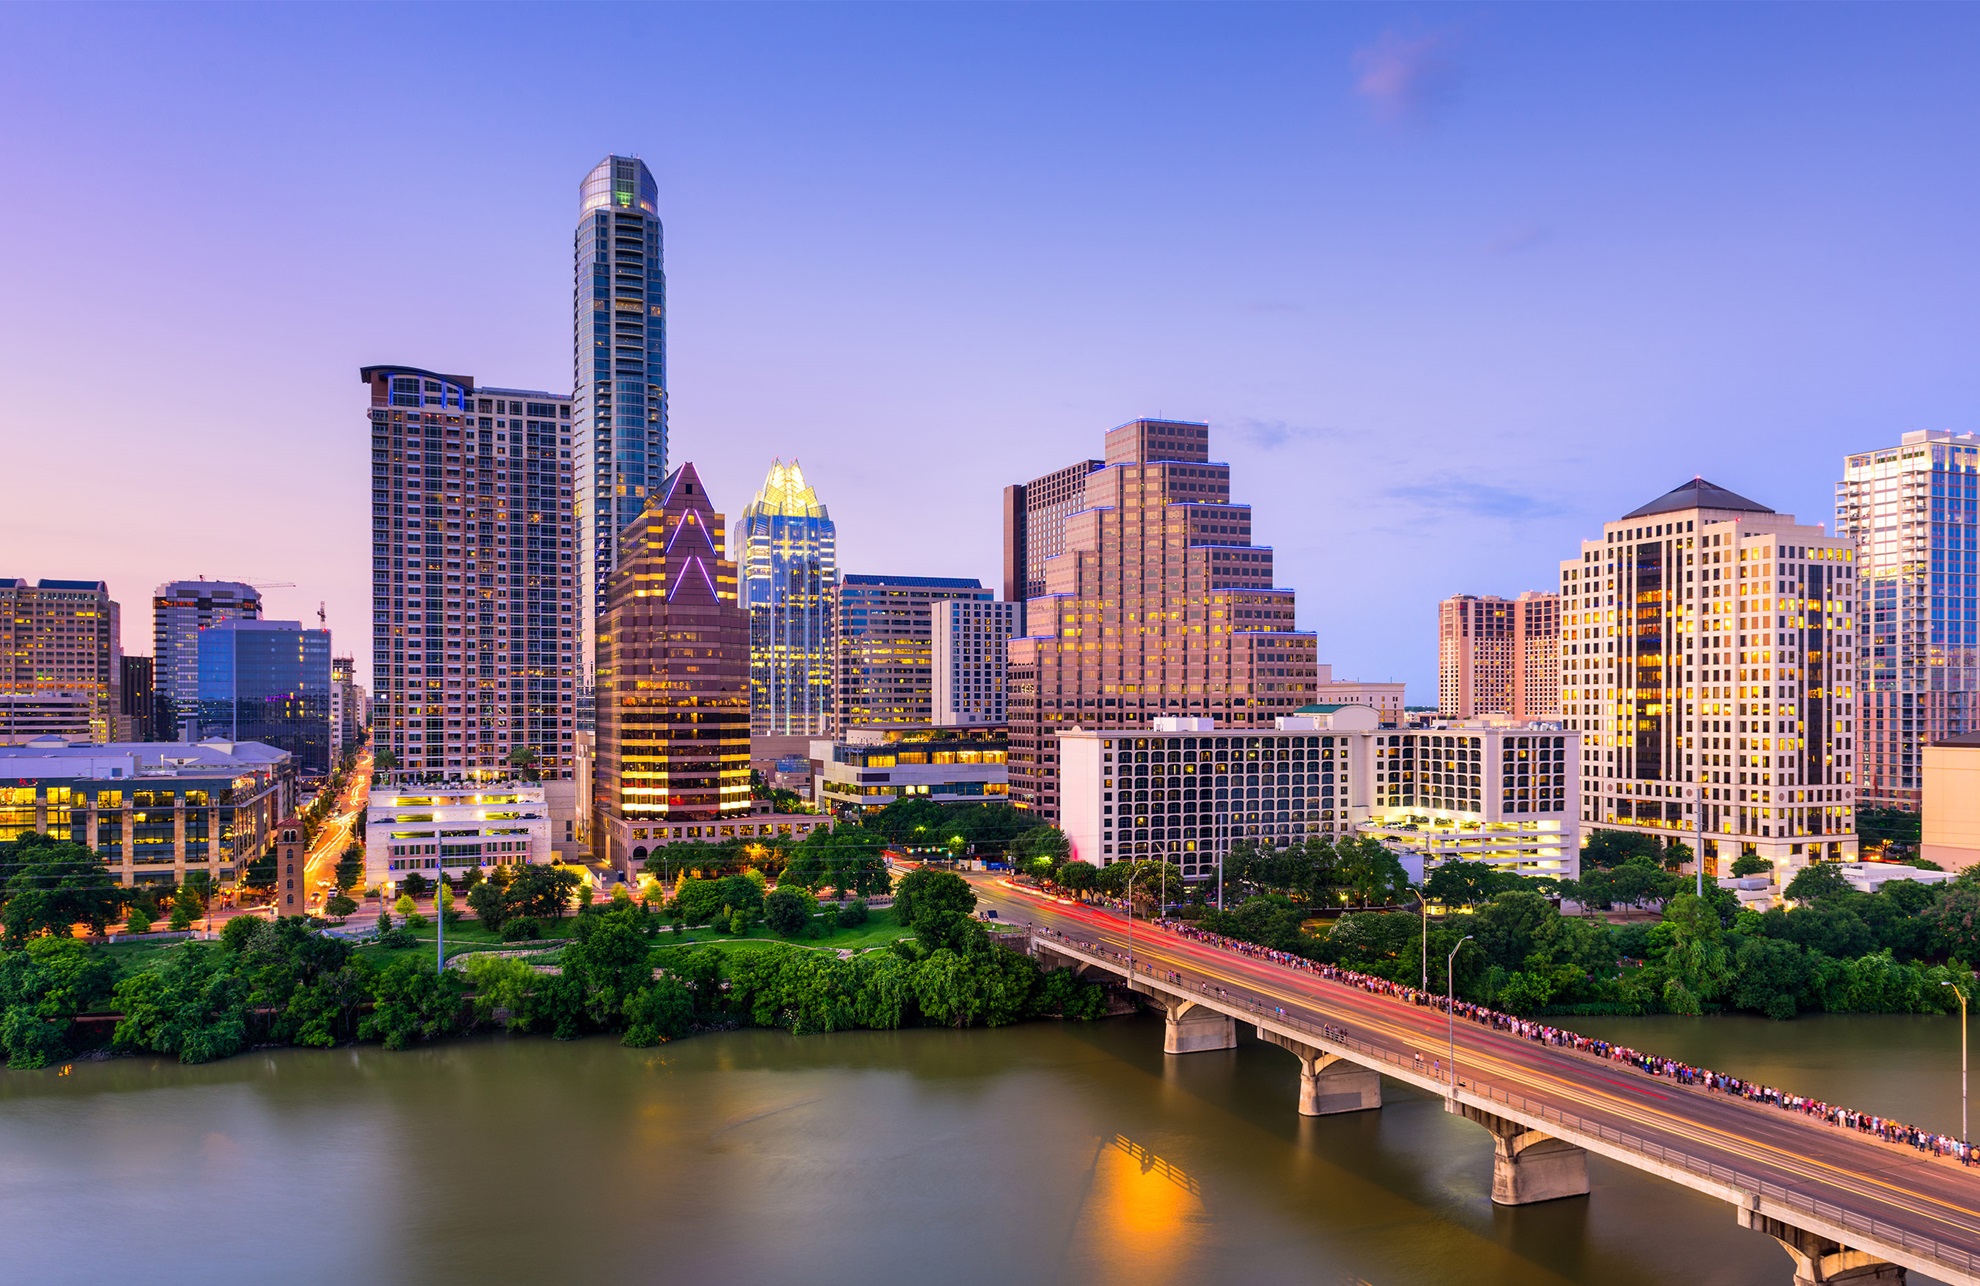 20 Best Hotels In Austin, Texas, For Your Next Trip